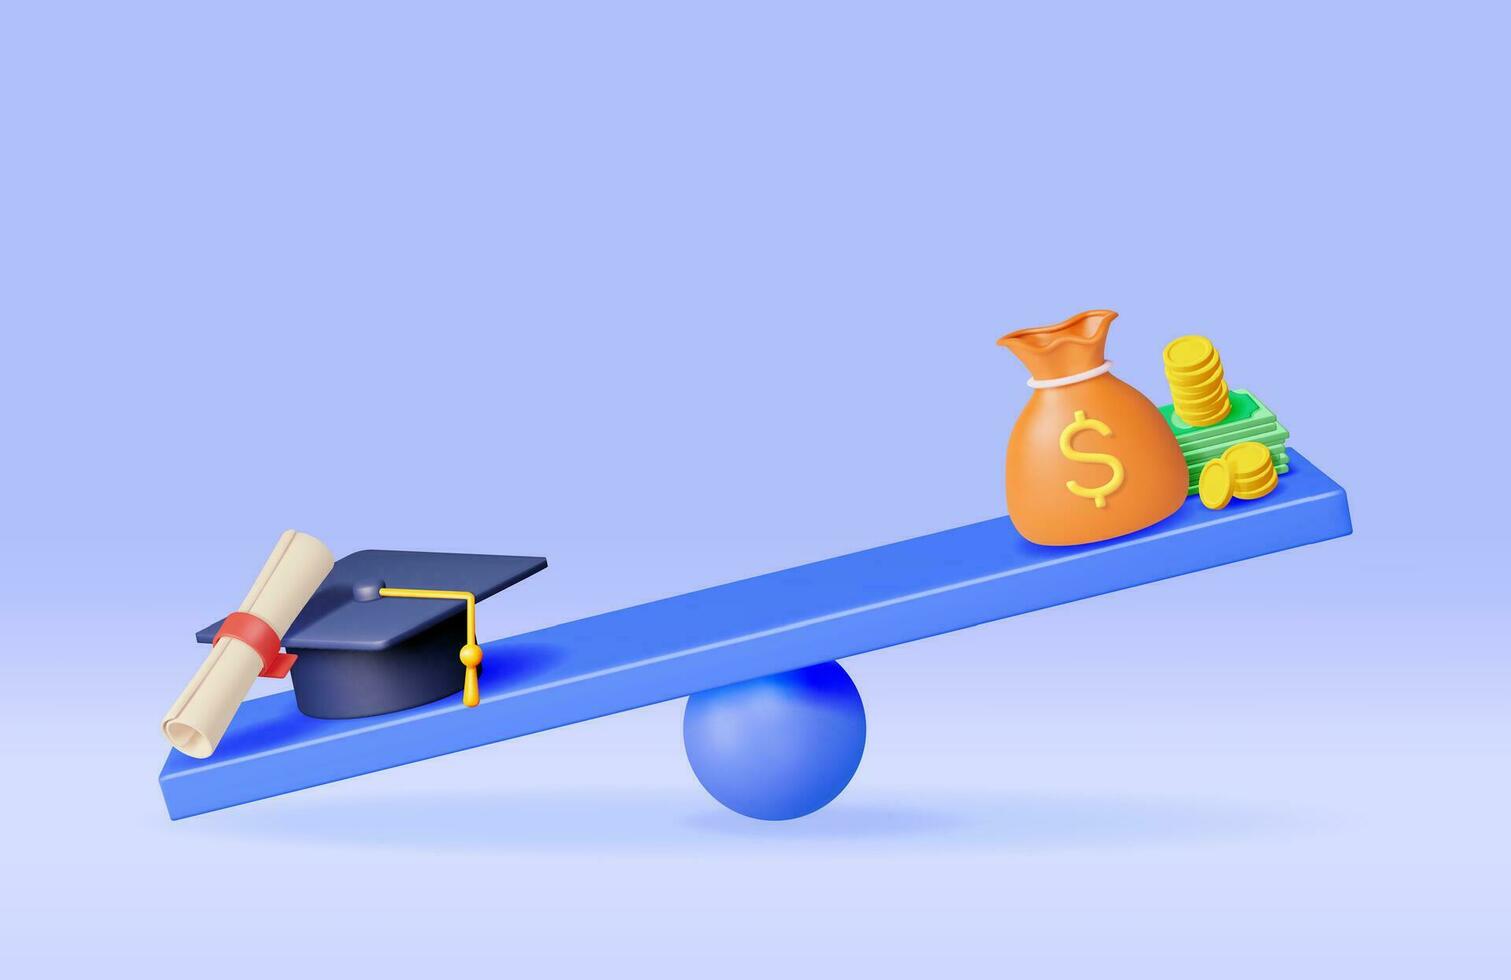 3D Graduation Cap with Diploma and Cash Money on Scales. Render Money with Graduation Hat on Scales. Education Cost Concept. Money Spending on Education, Investment in Future. Vector Illustration